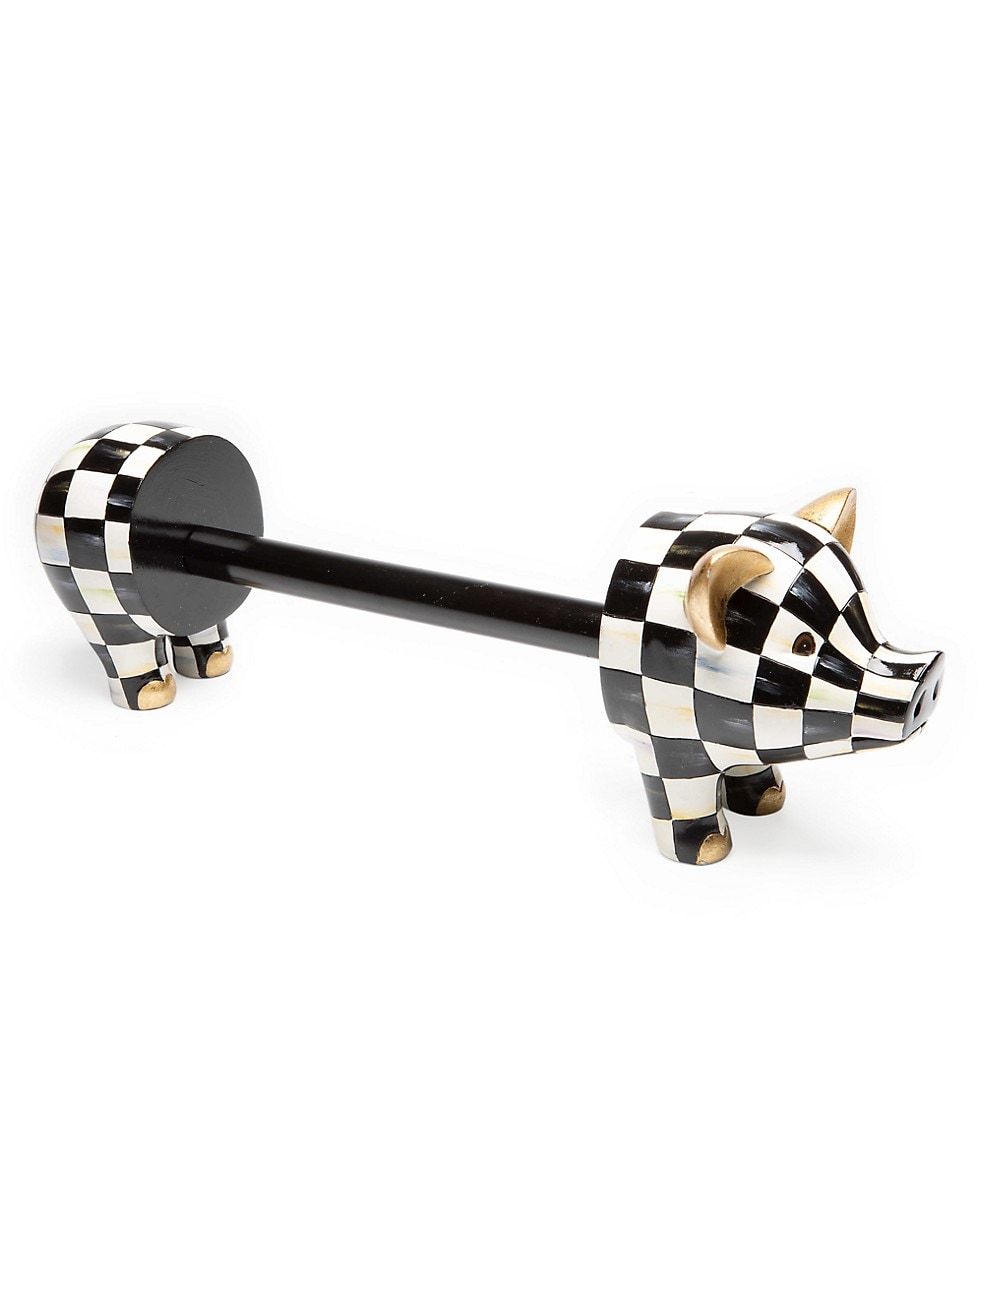 Courtly Check Paper Towel Holder | Saks Fifth Avenue